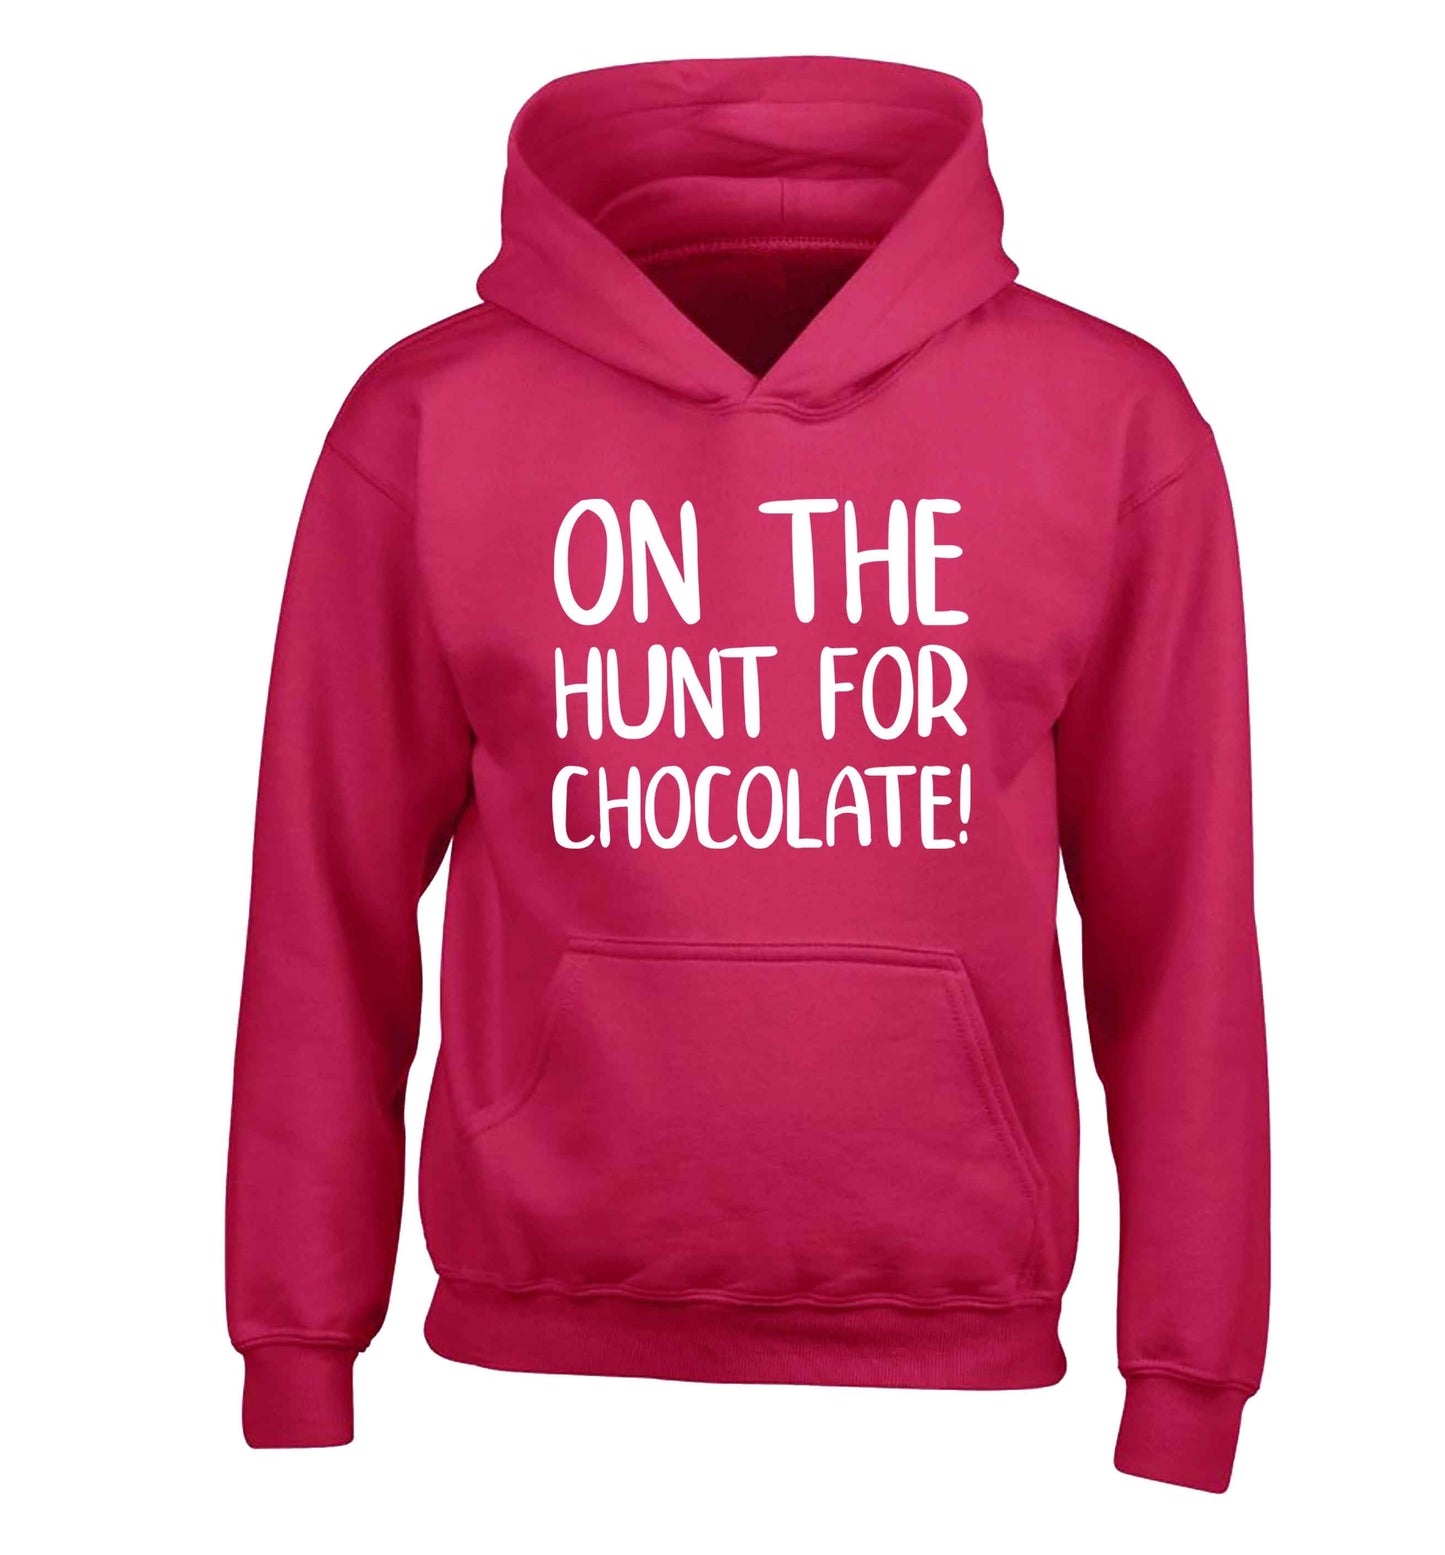 On the hunt for chocolate! children's pink hoodie 12-13 Years